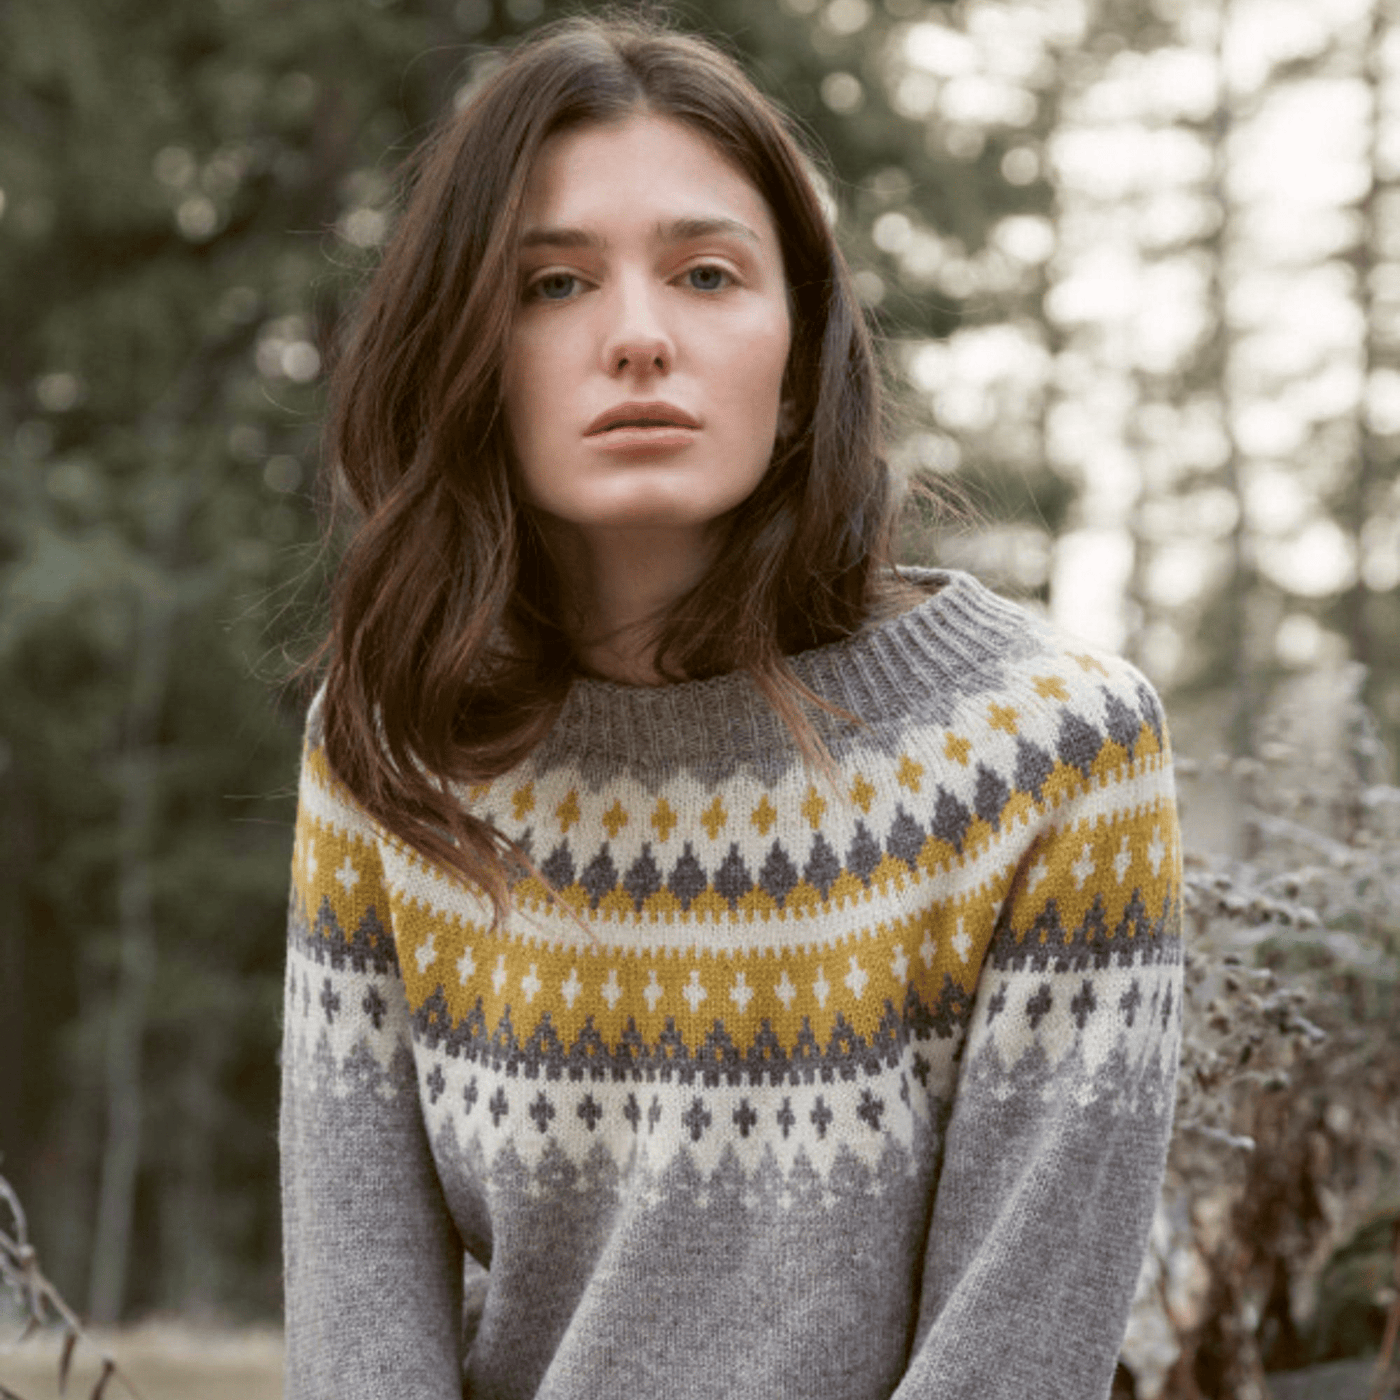 Woman wearing knitted tan, yellow, and grey patterned sweater from Rauma Finullgarn Varde pattern book from the Woolly Thistle.